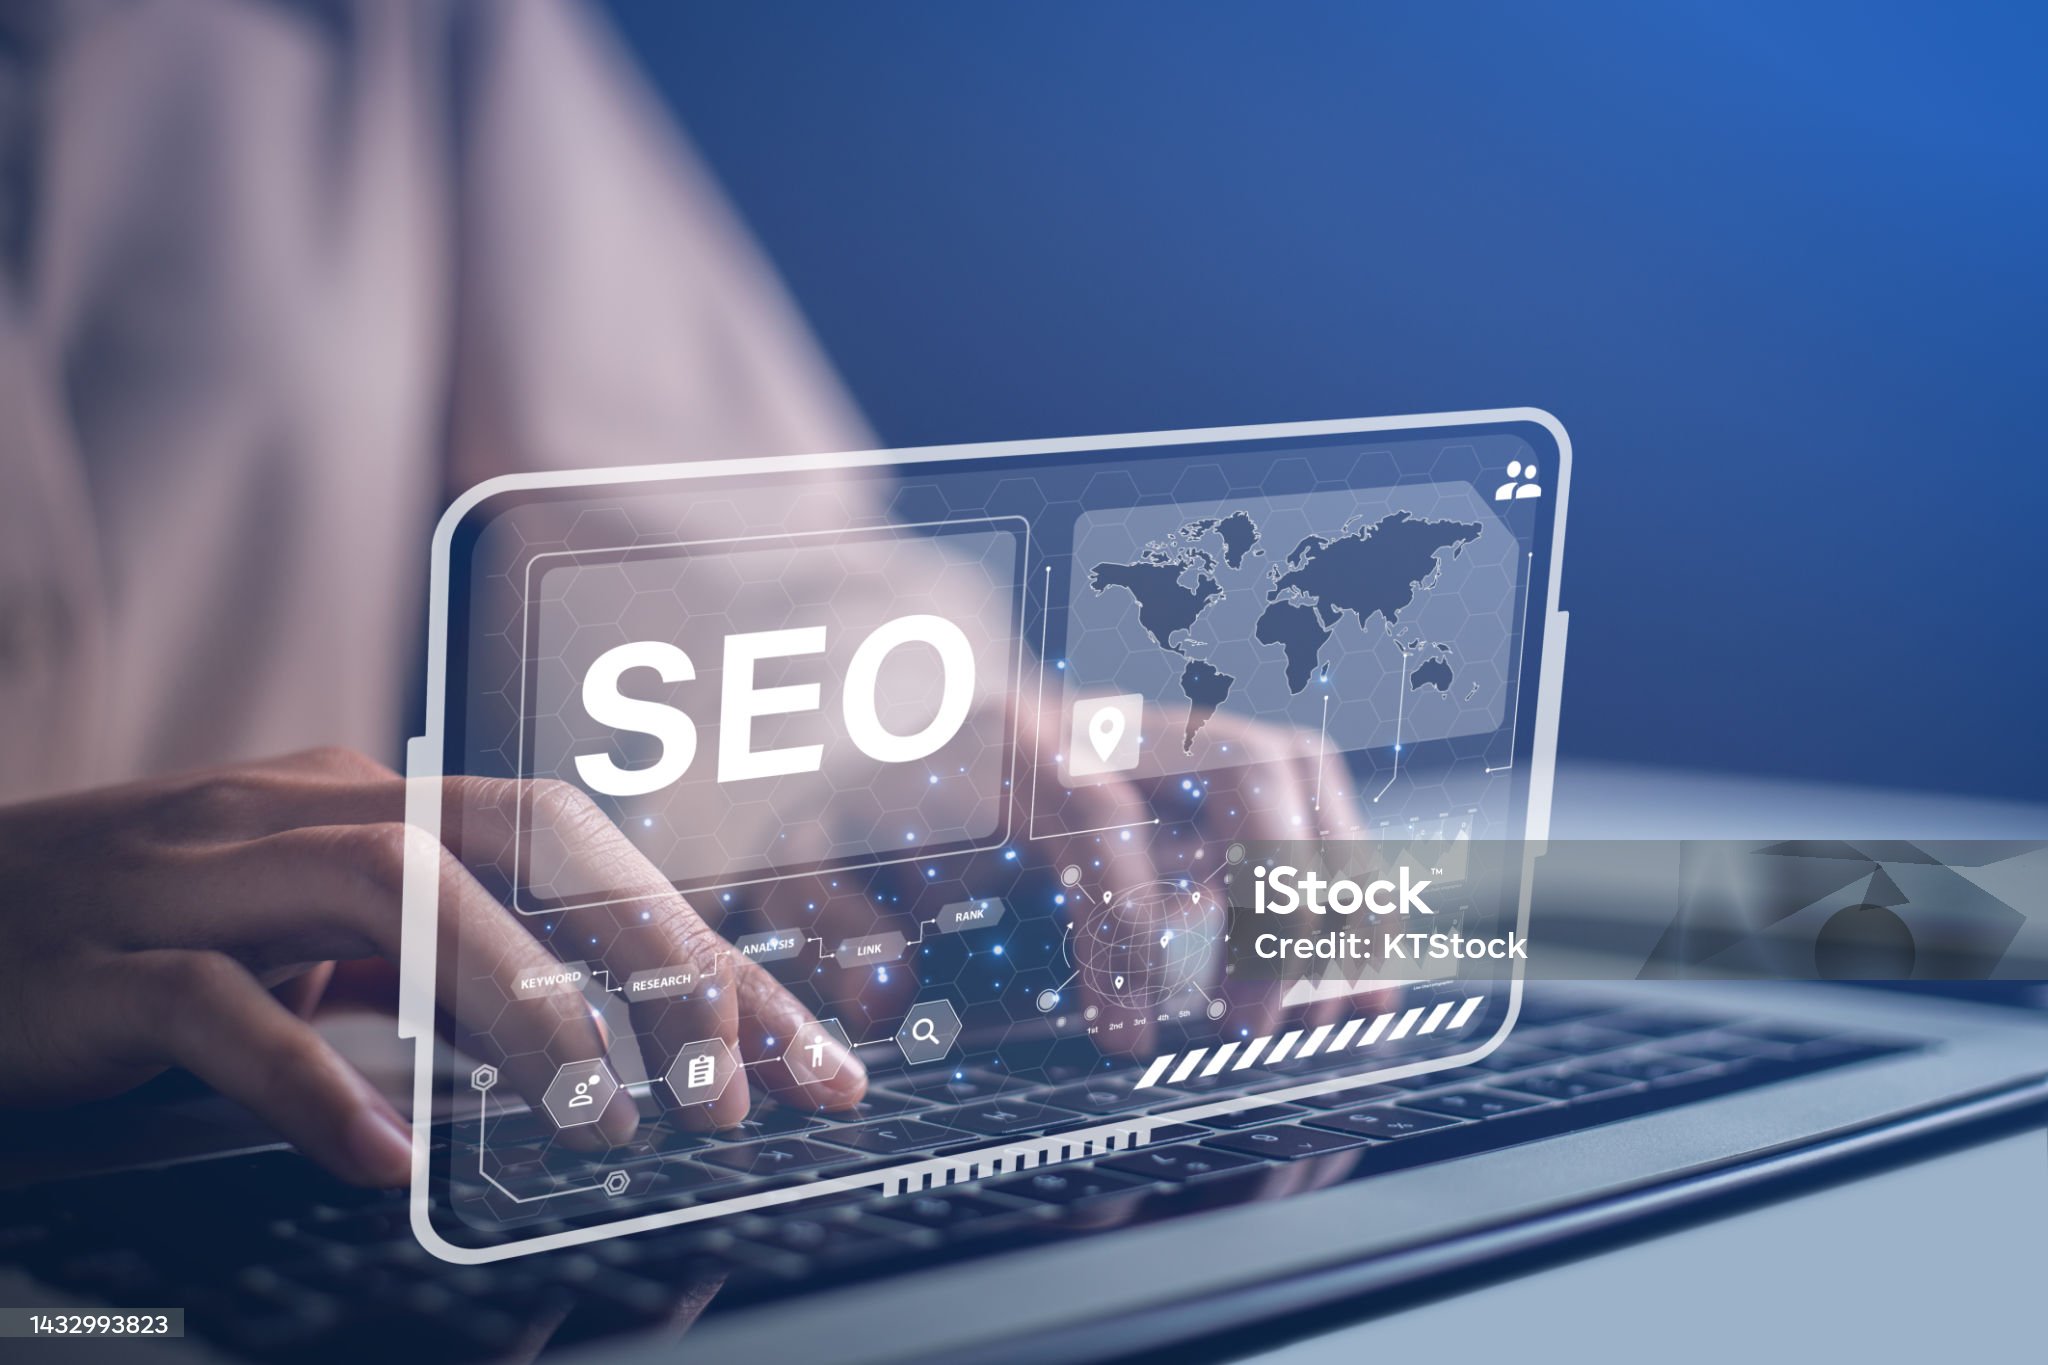 Is SEO Worth It for Small Business